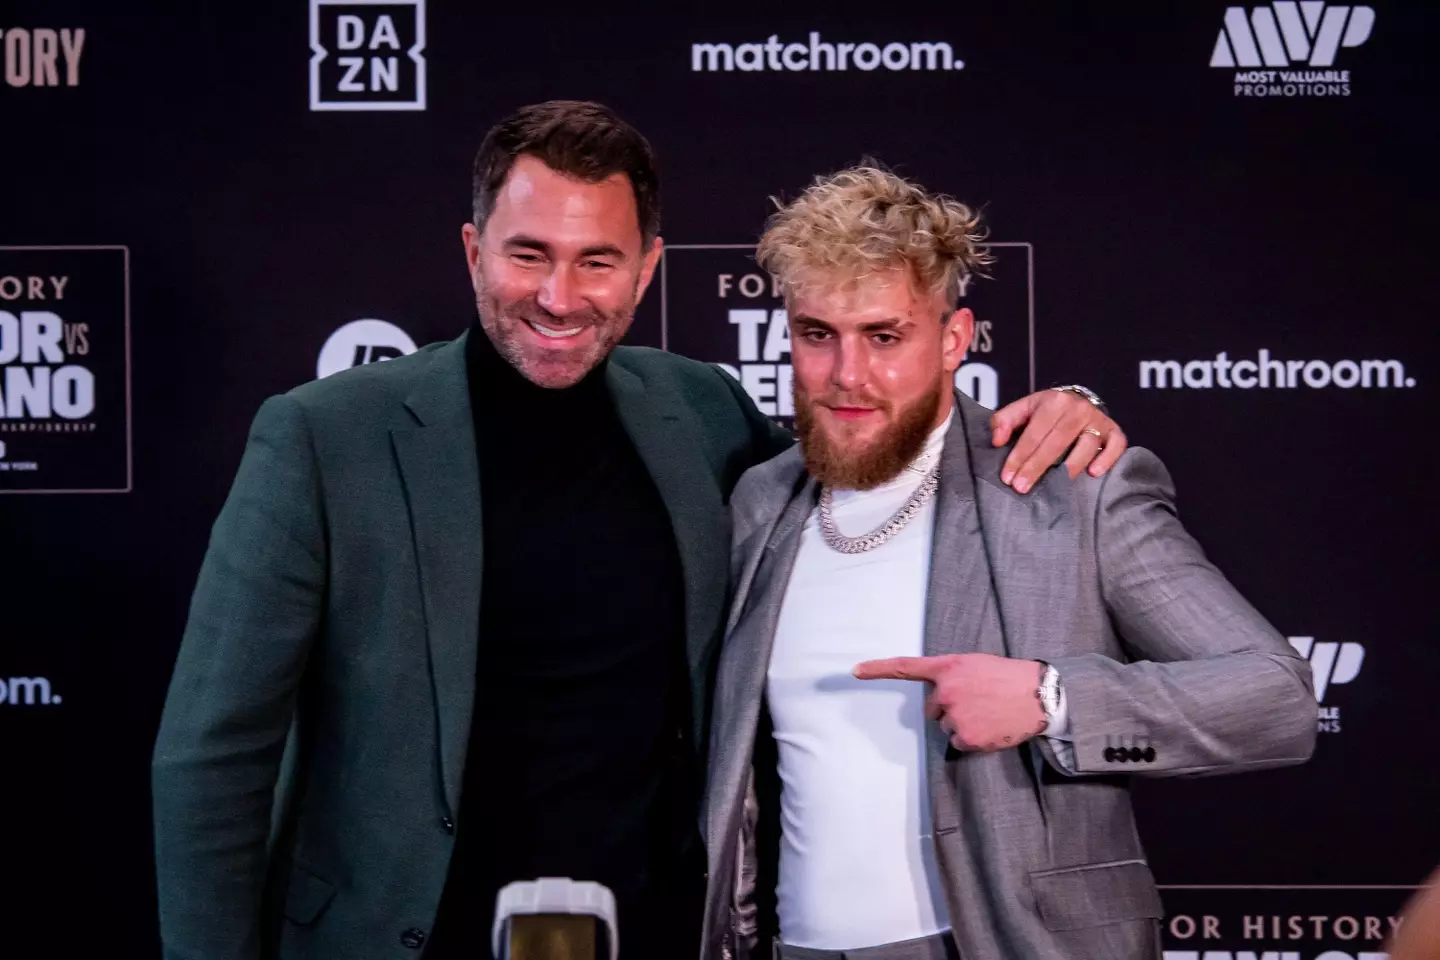 Eddie Hearn and Jake Paul have promoted fights together.